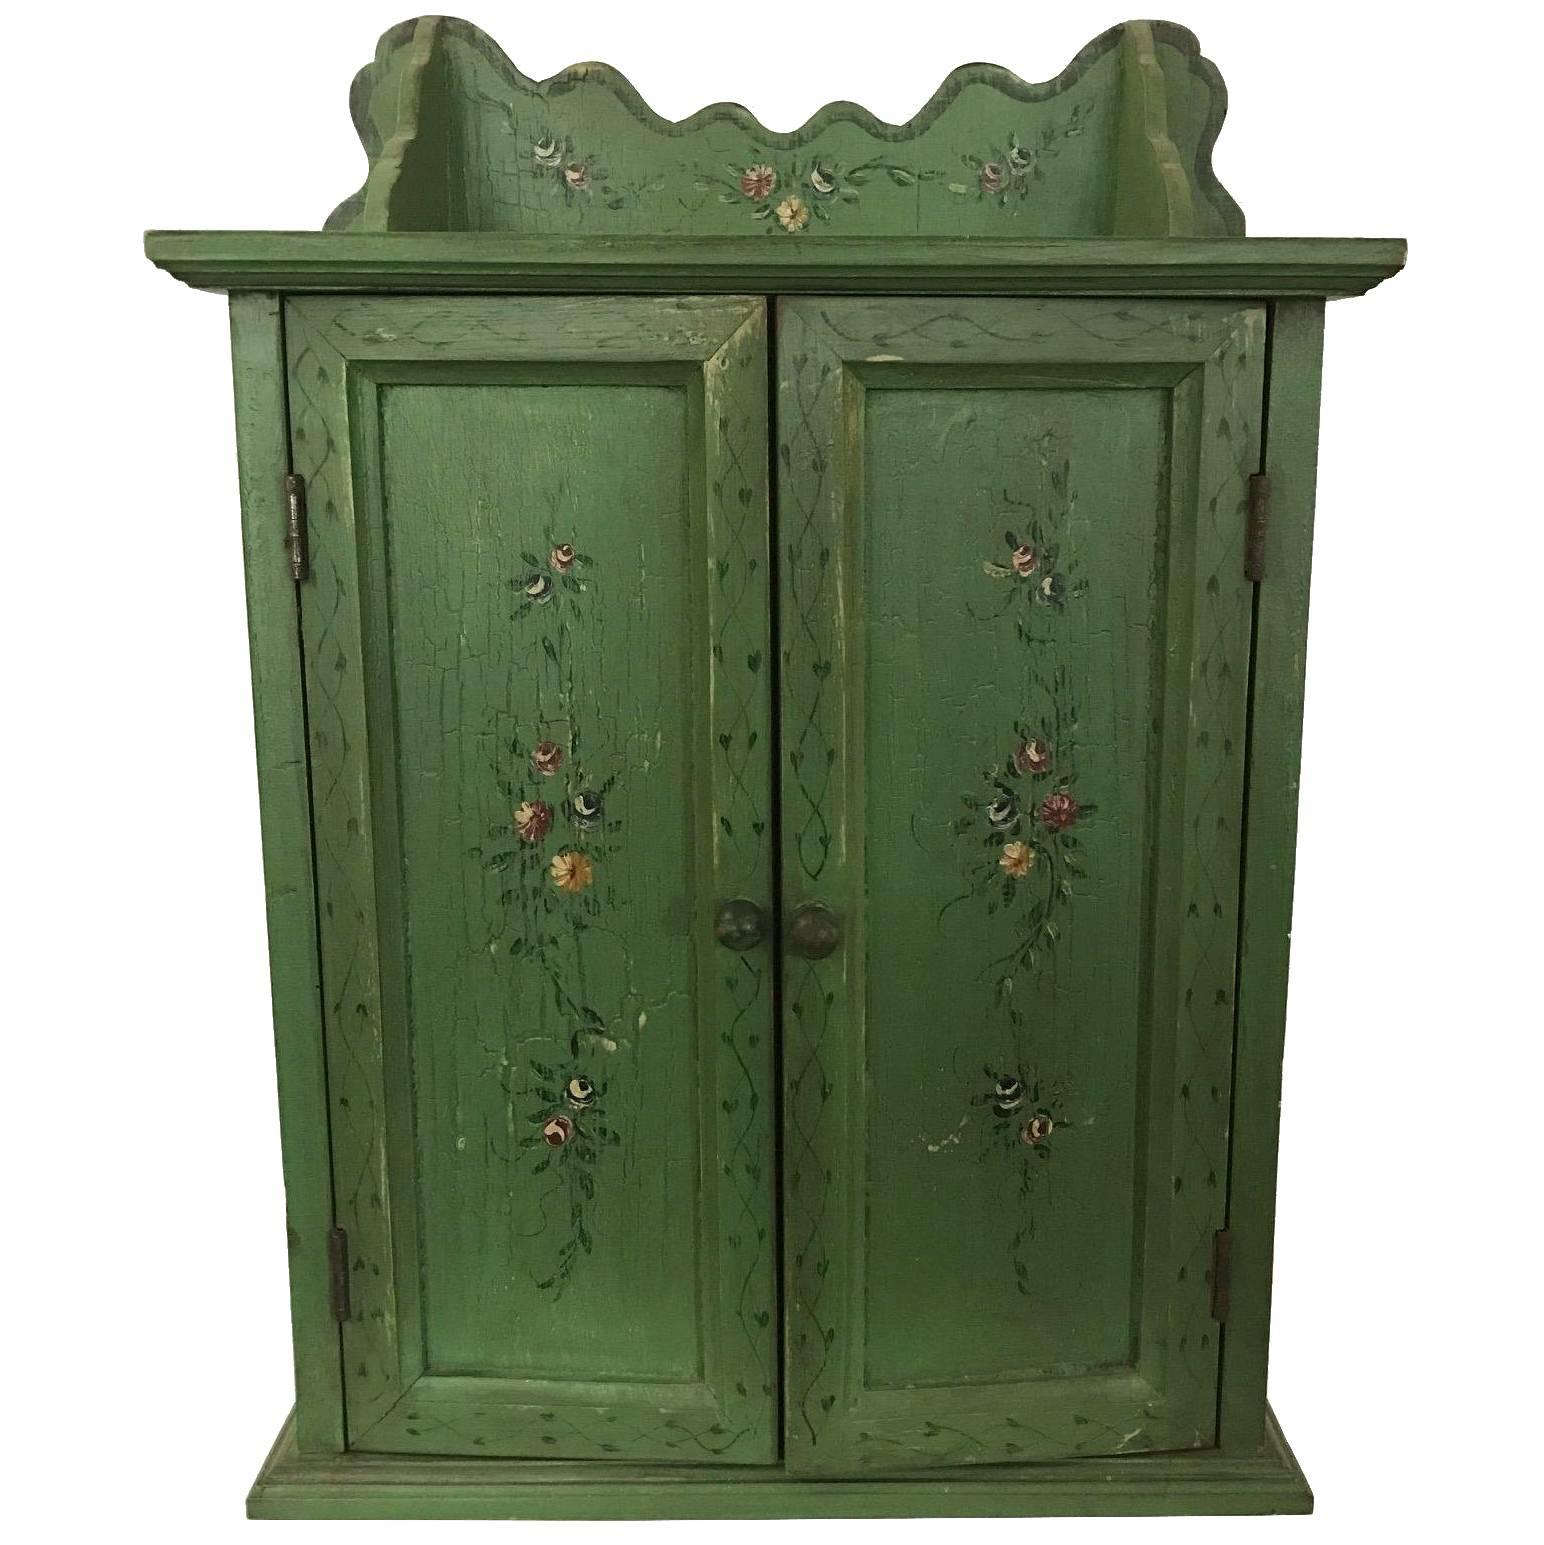 Fantastic French Revival "Giverny Garden Green"  Cupboard or Cabinet Handpaint